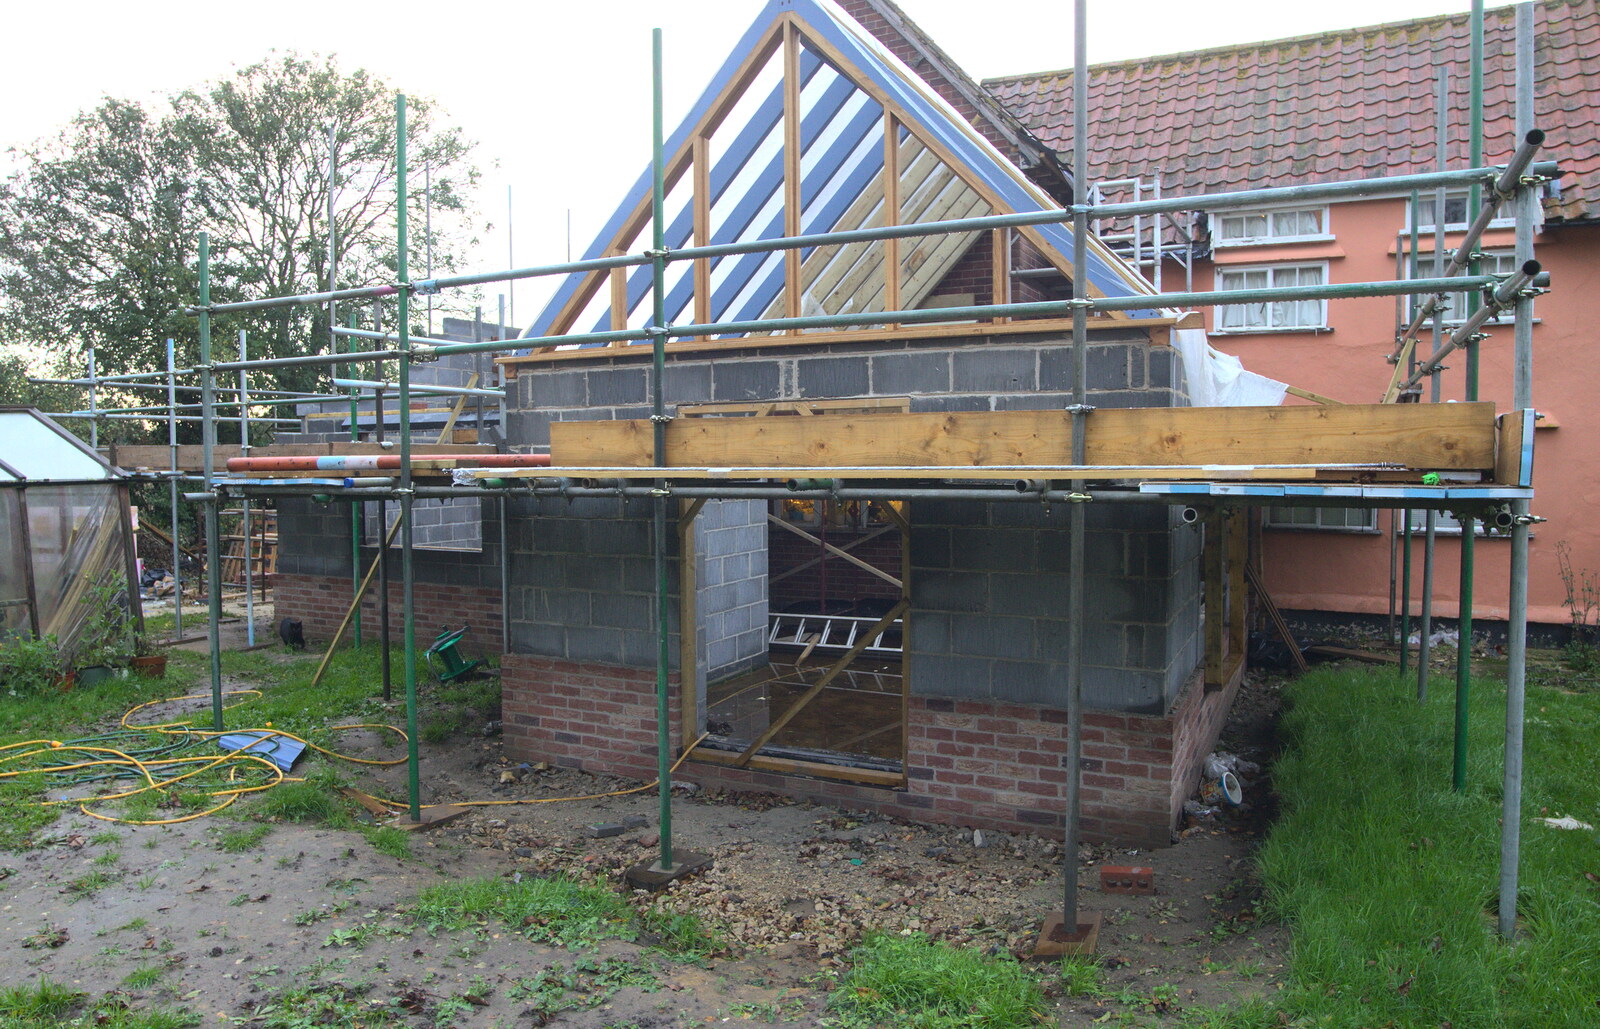 The conservatory roof is coming along nicely from A November Miscellany and Building Progress, Thornham and Brome, Suffolk - 17th November 2013